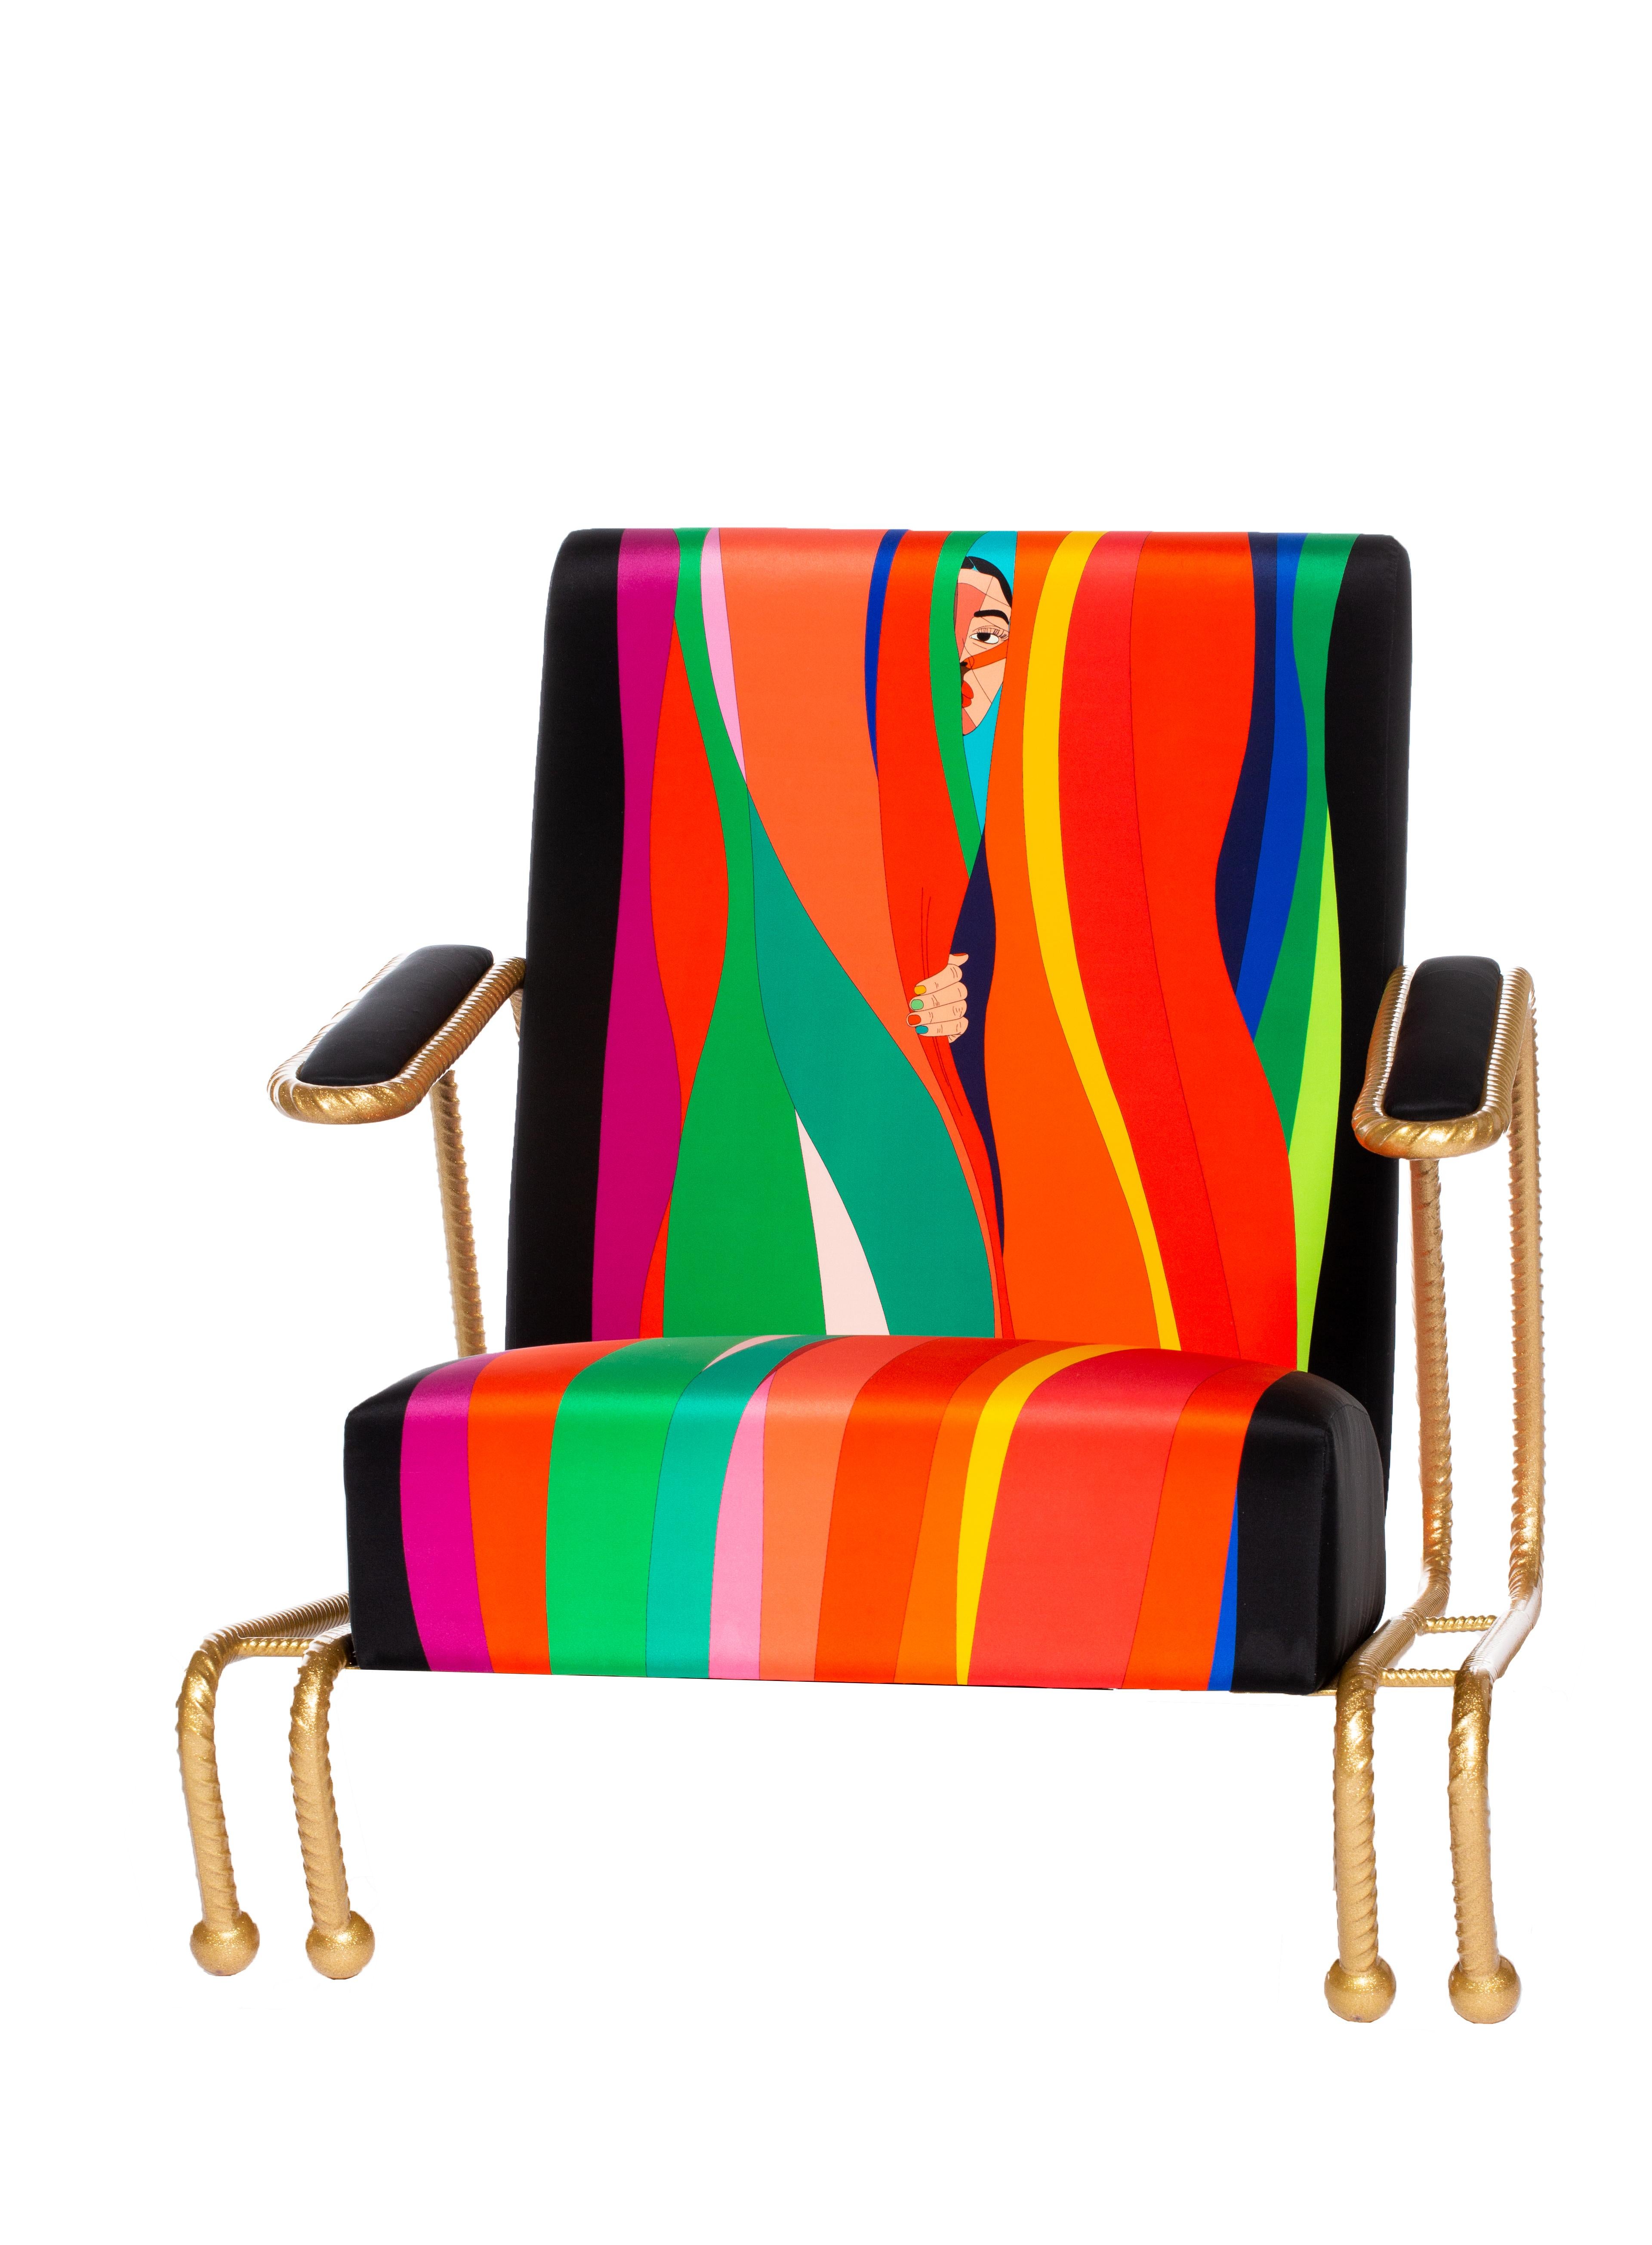 Custom-made lounge chair with one hundred percent silk upholstery in original graphic textiles. The frame is made from 1